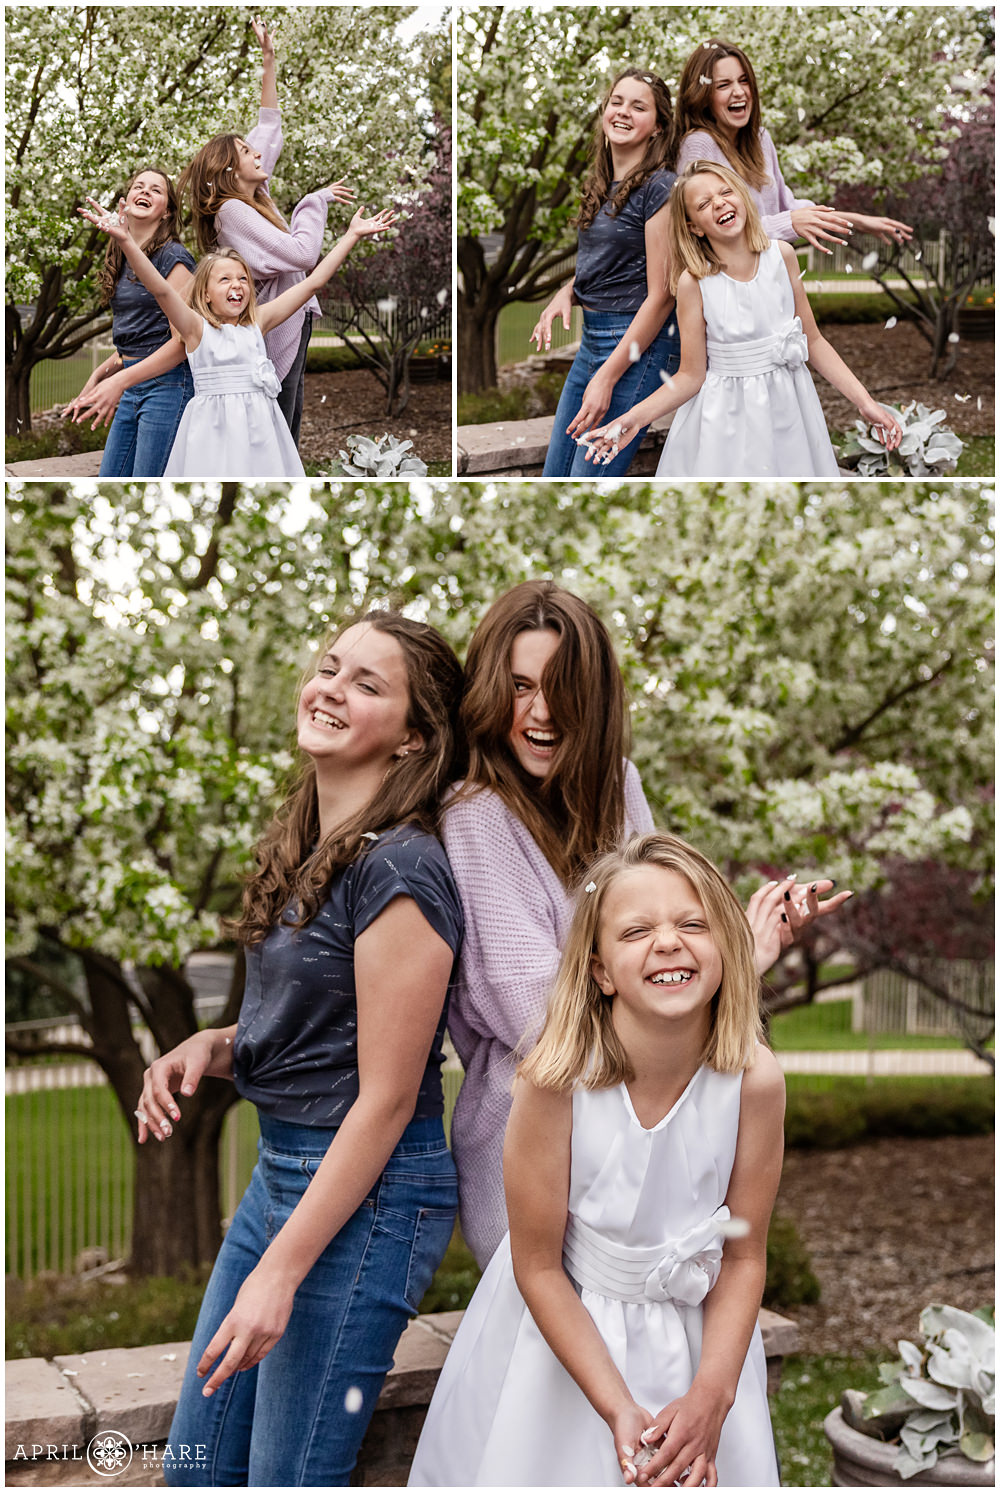 Candid photo of three sisters throwing flower petals in the air for spring in their backyard in Denver